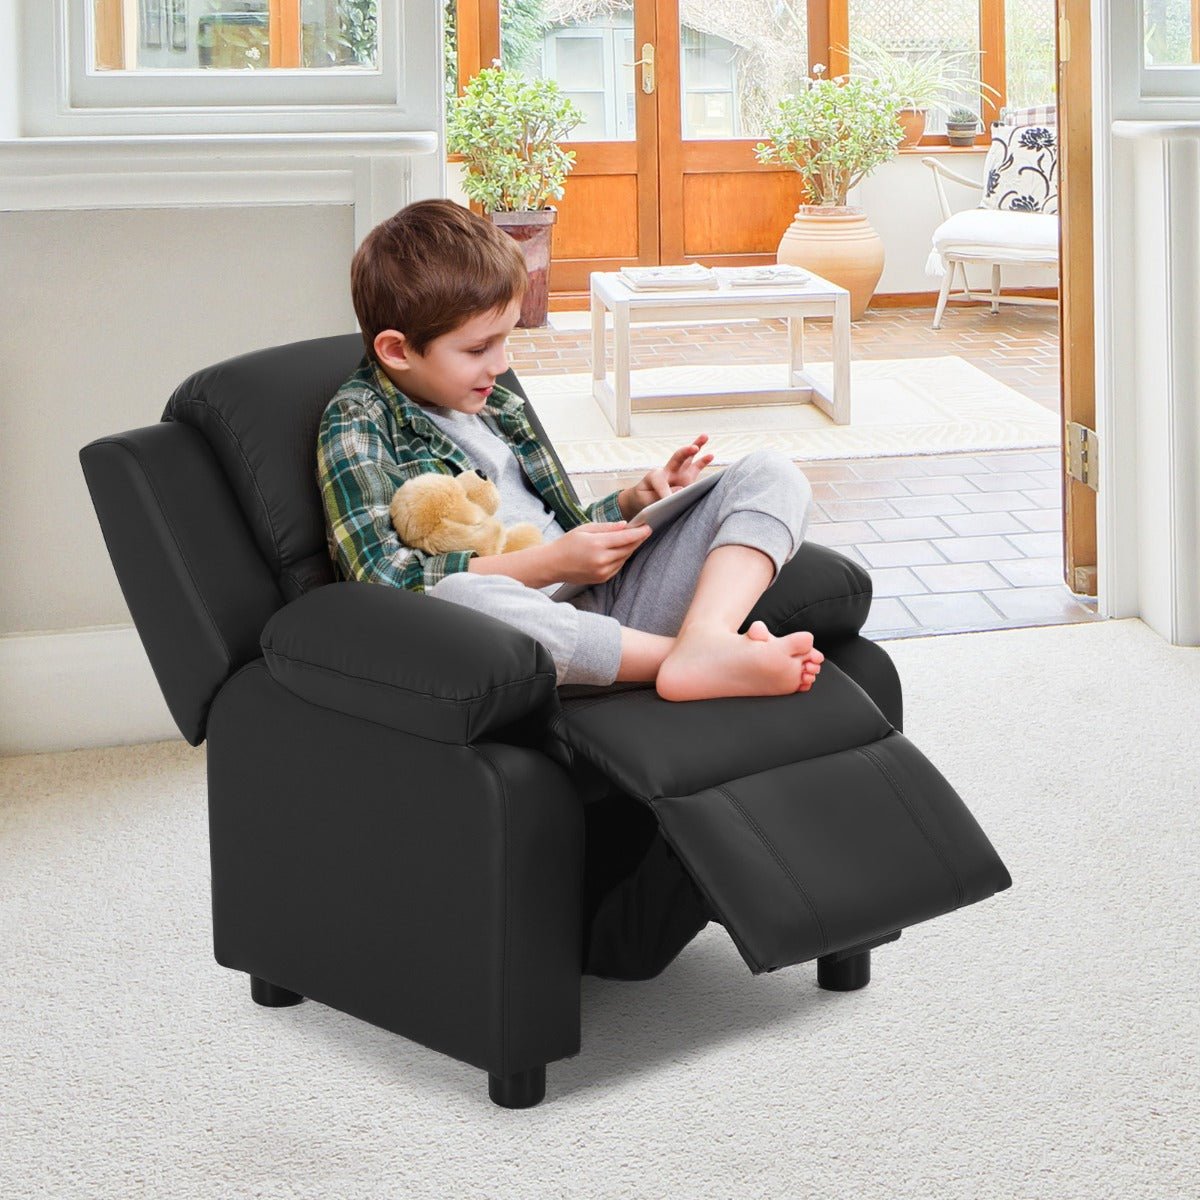 Shop Upholstered Kid Lounge Sofa: Easy-Clean PU Cover - Playroom Delight